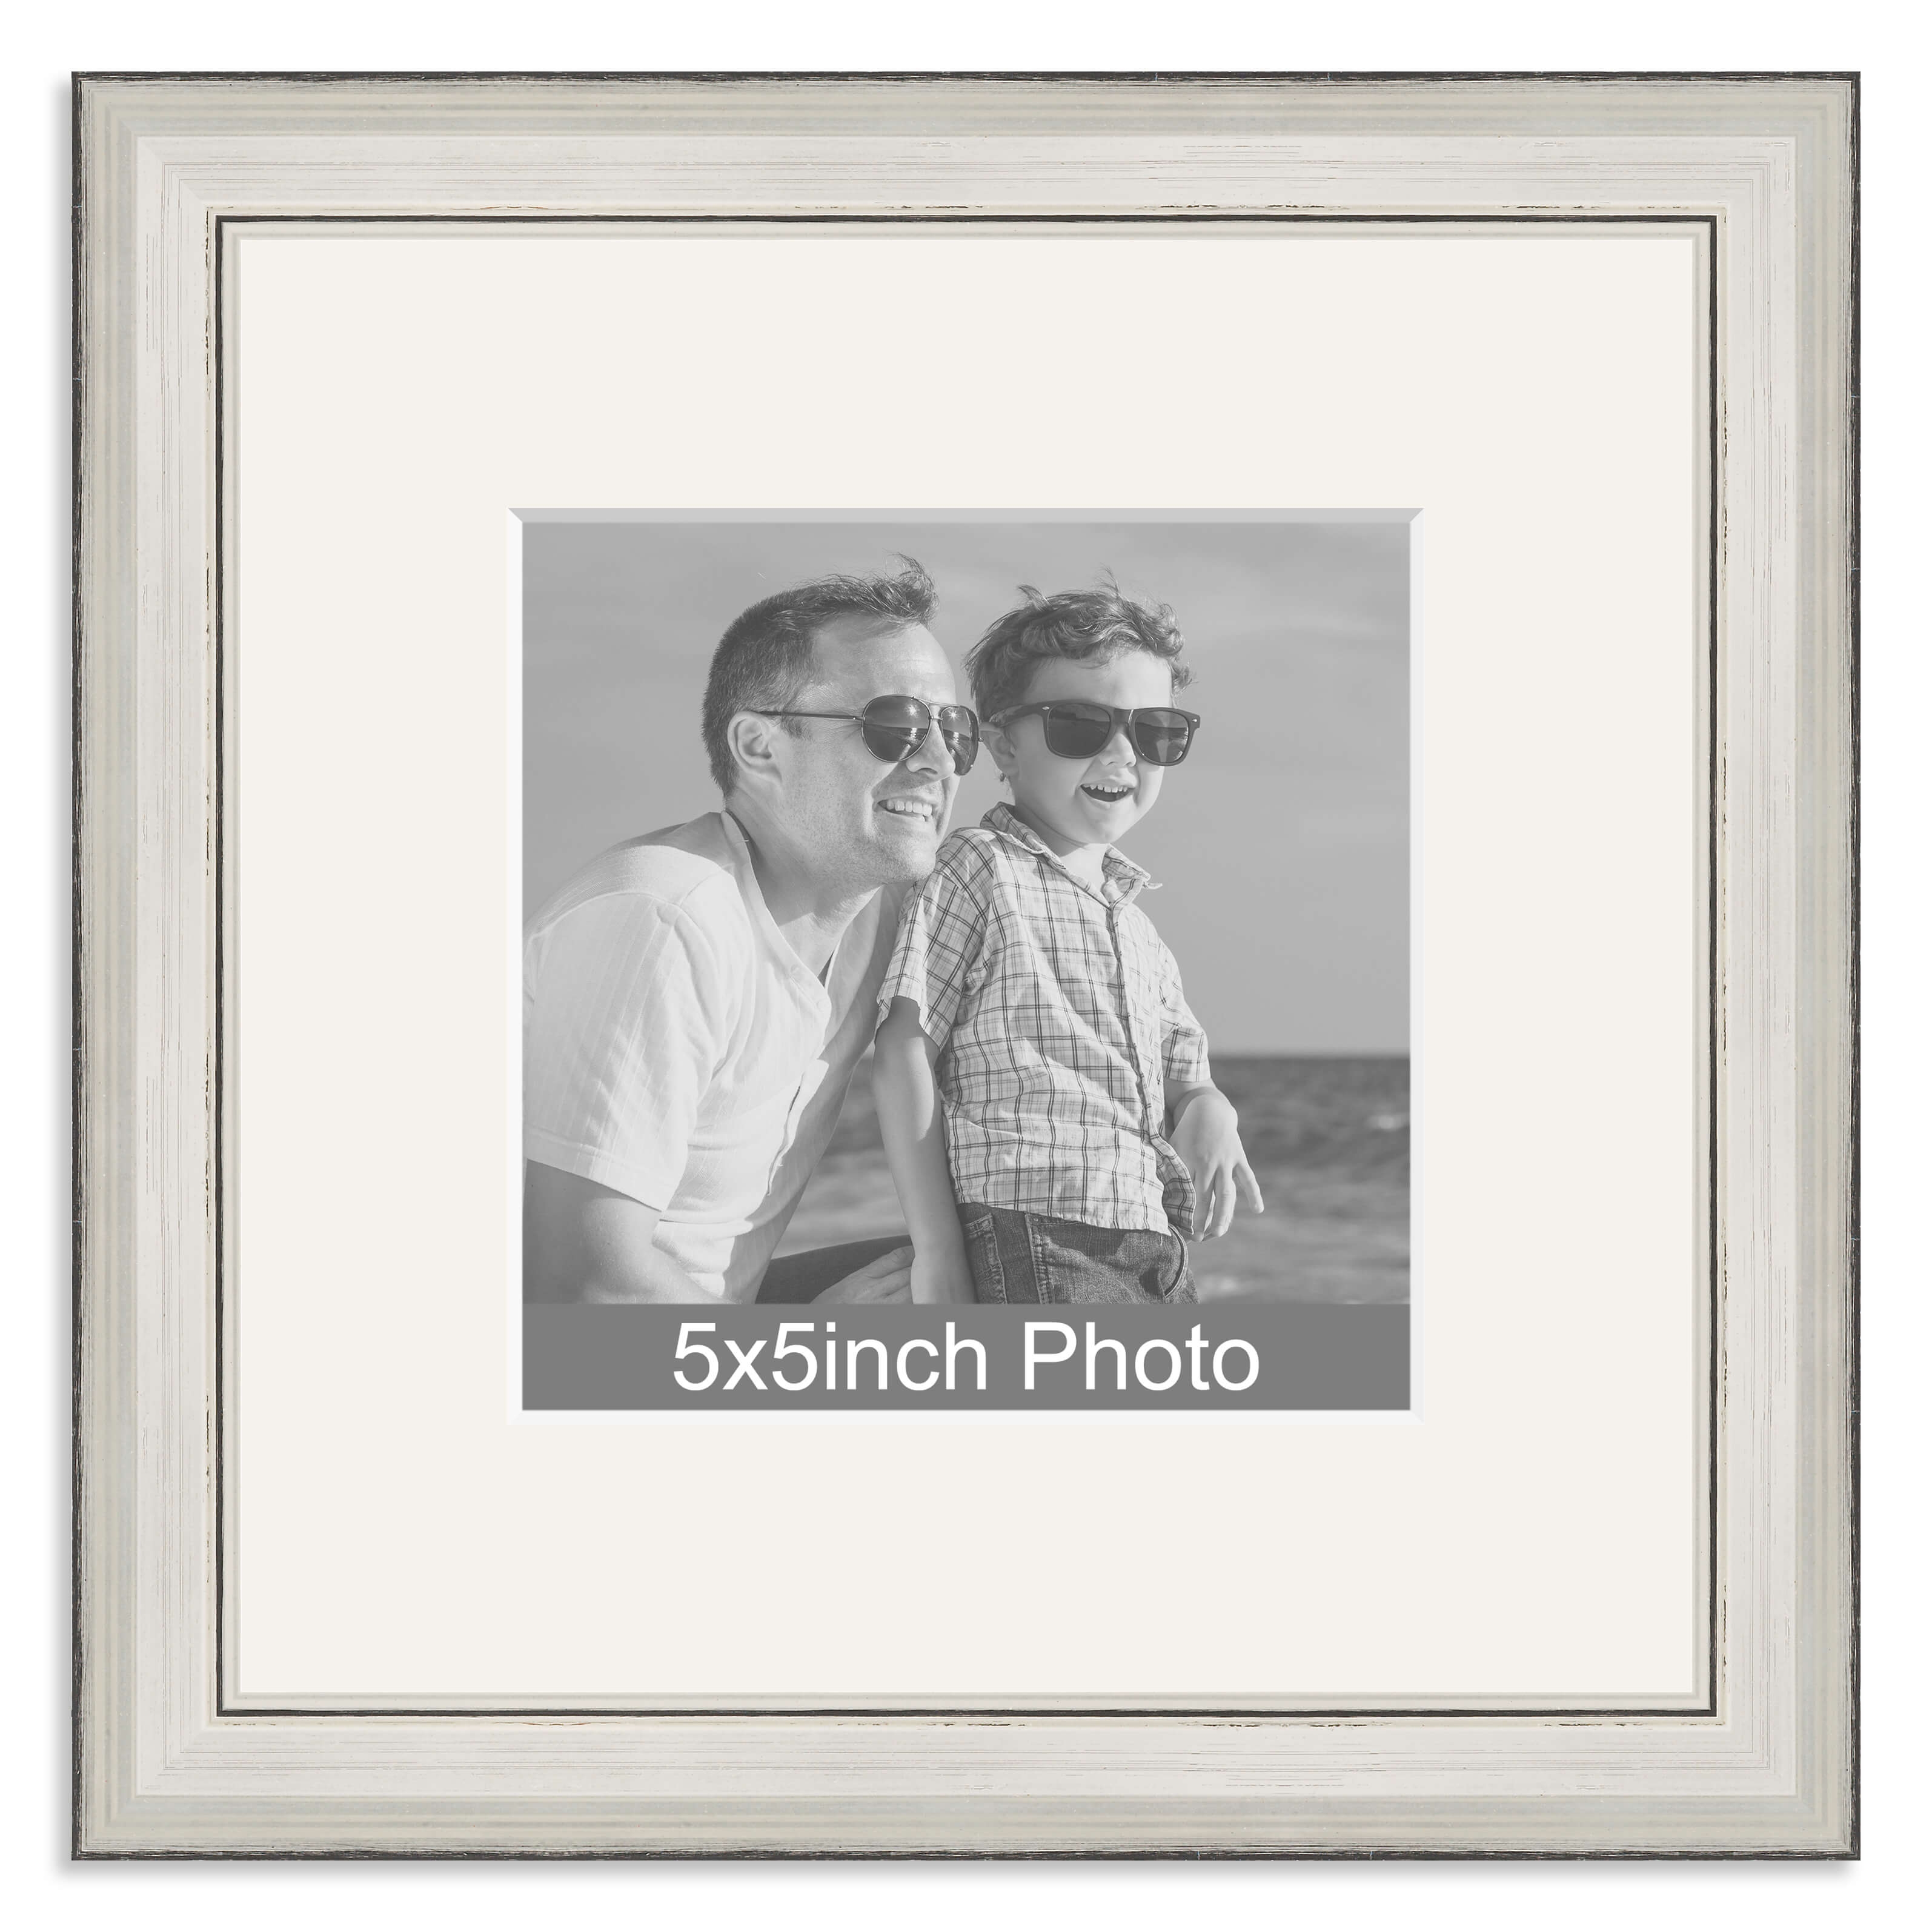 Silver Wooden Photo Frame with mount for a 5x5in Photo – Photo to follow by email